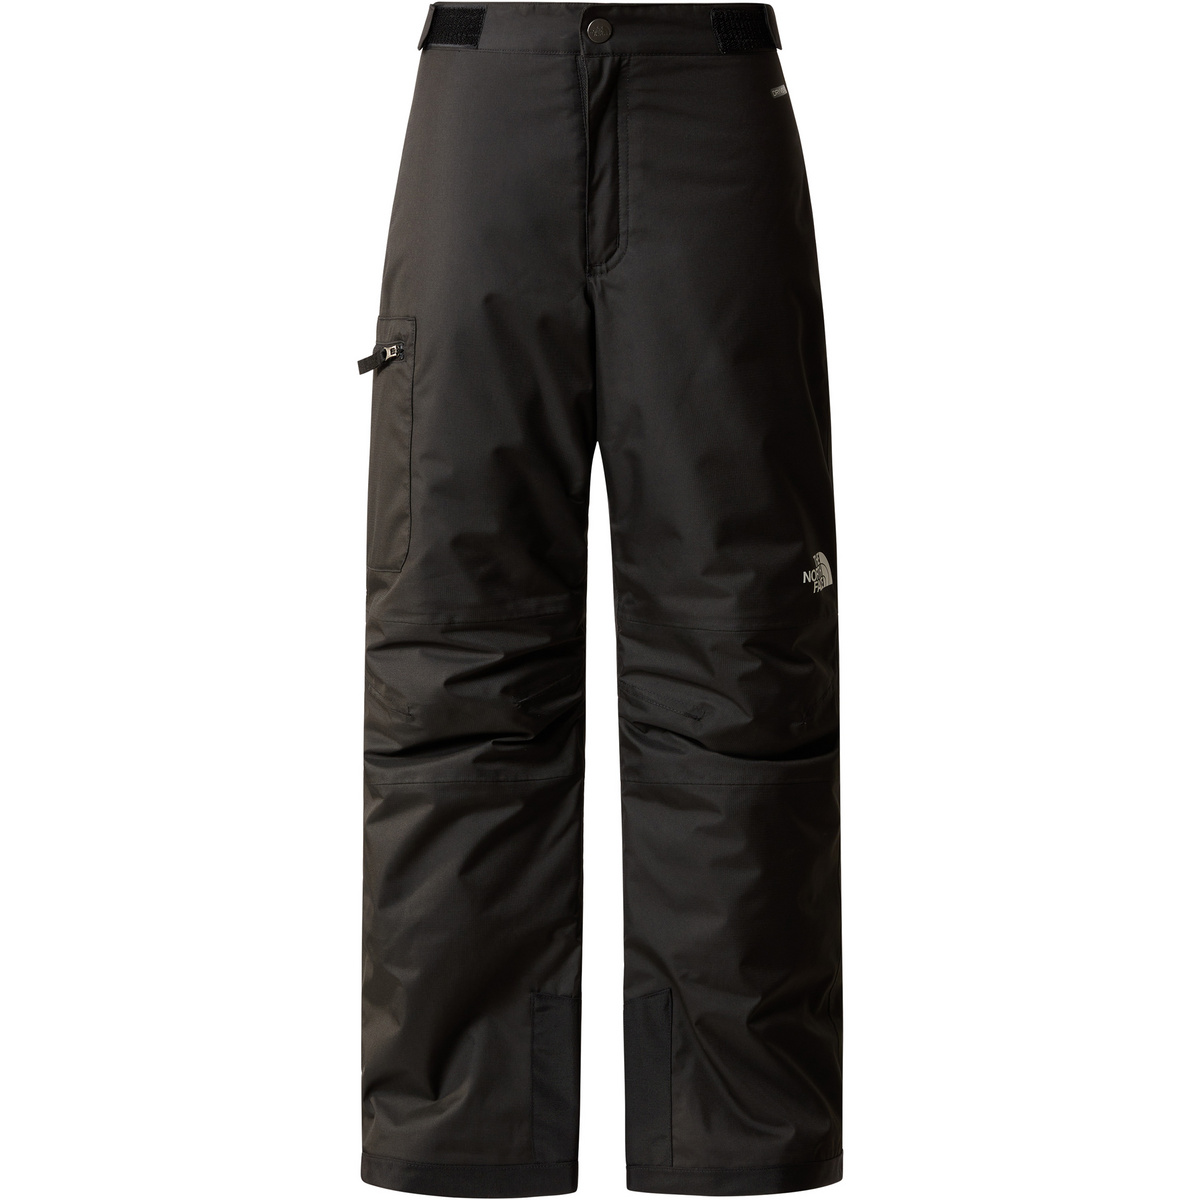 The North Face Kinder Freedom Insulated Hose von The North Face